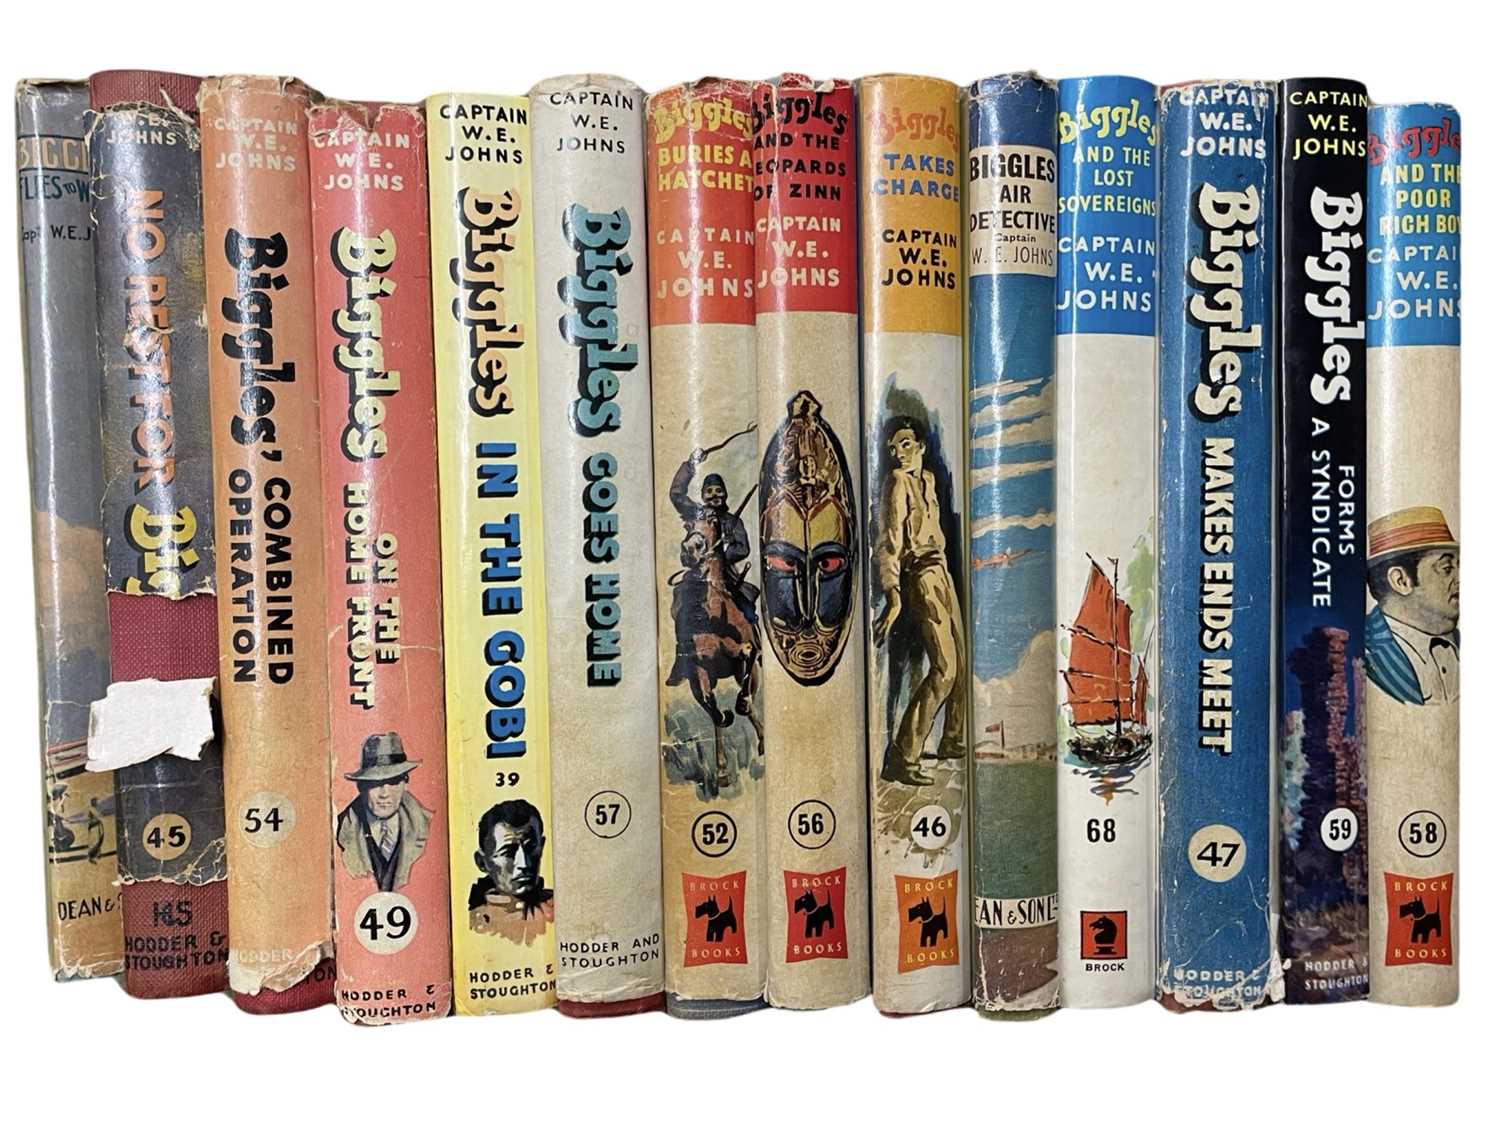 W E JOHNS: A collection of Biggles books (various editions), to include: - Biggles and the Lost